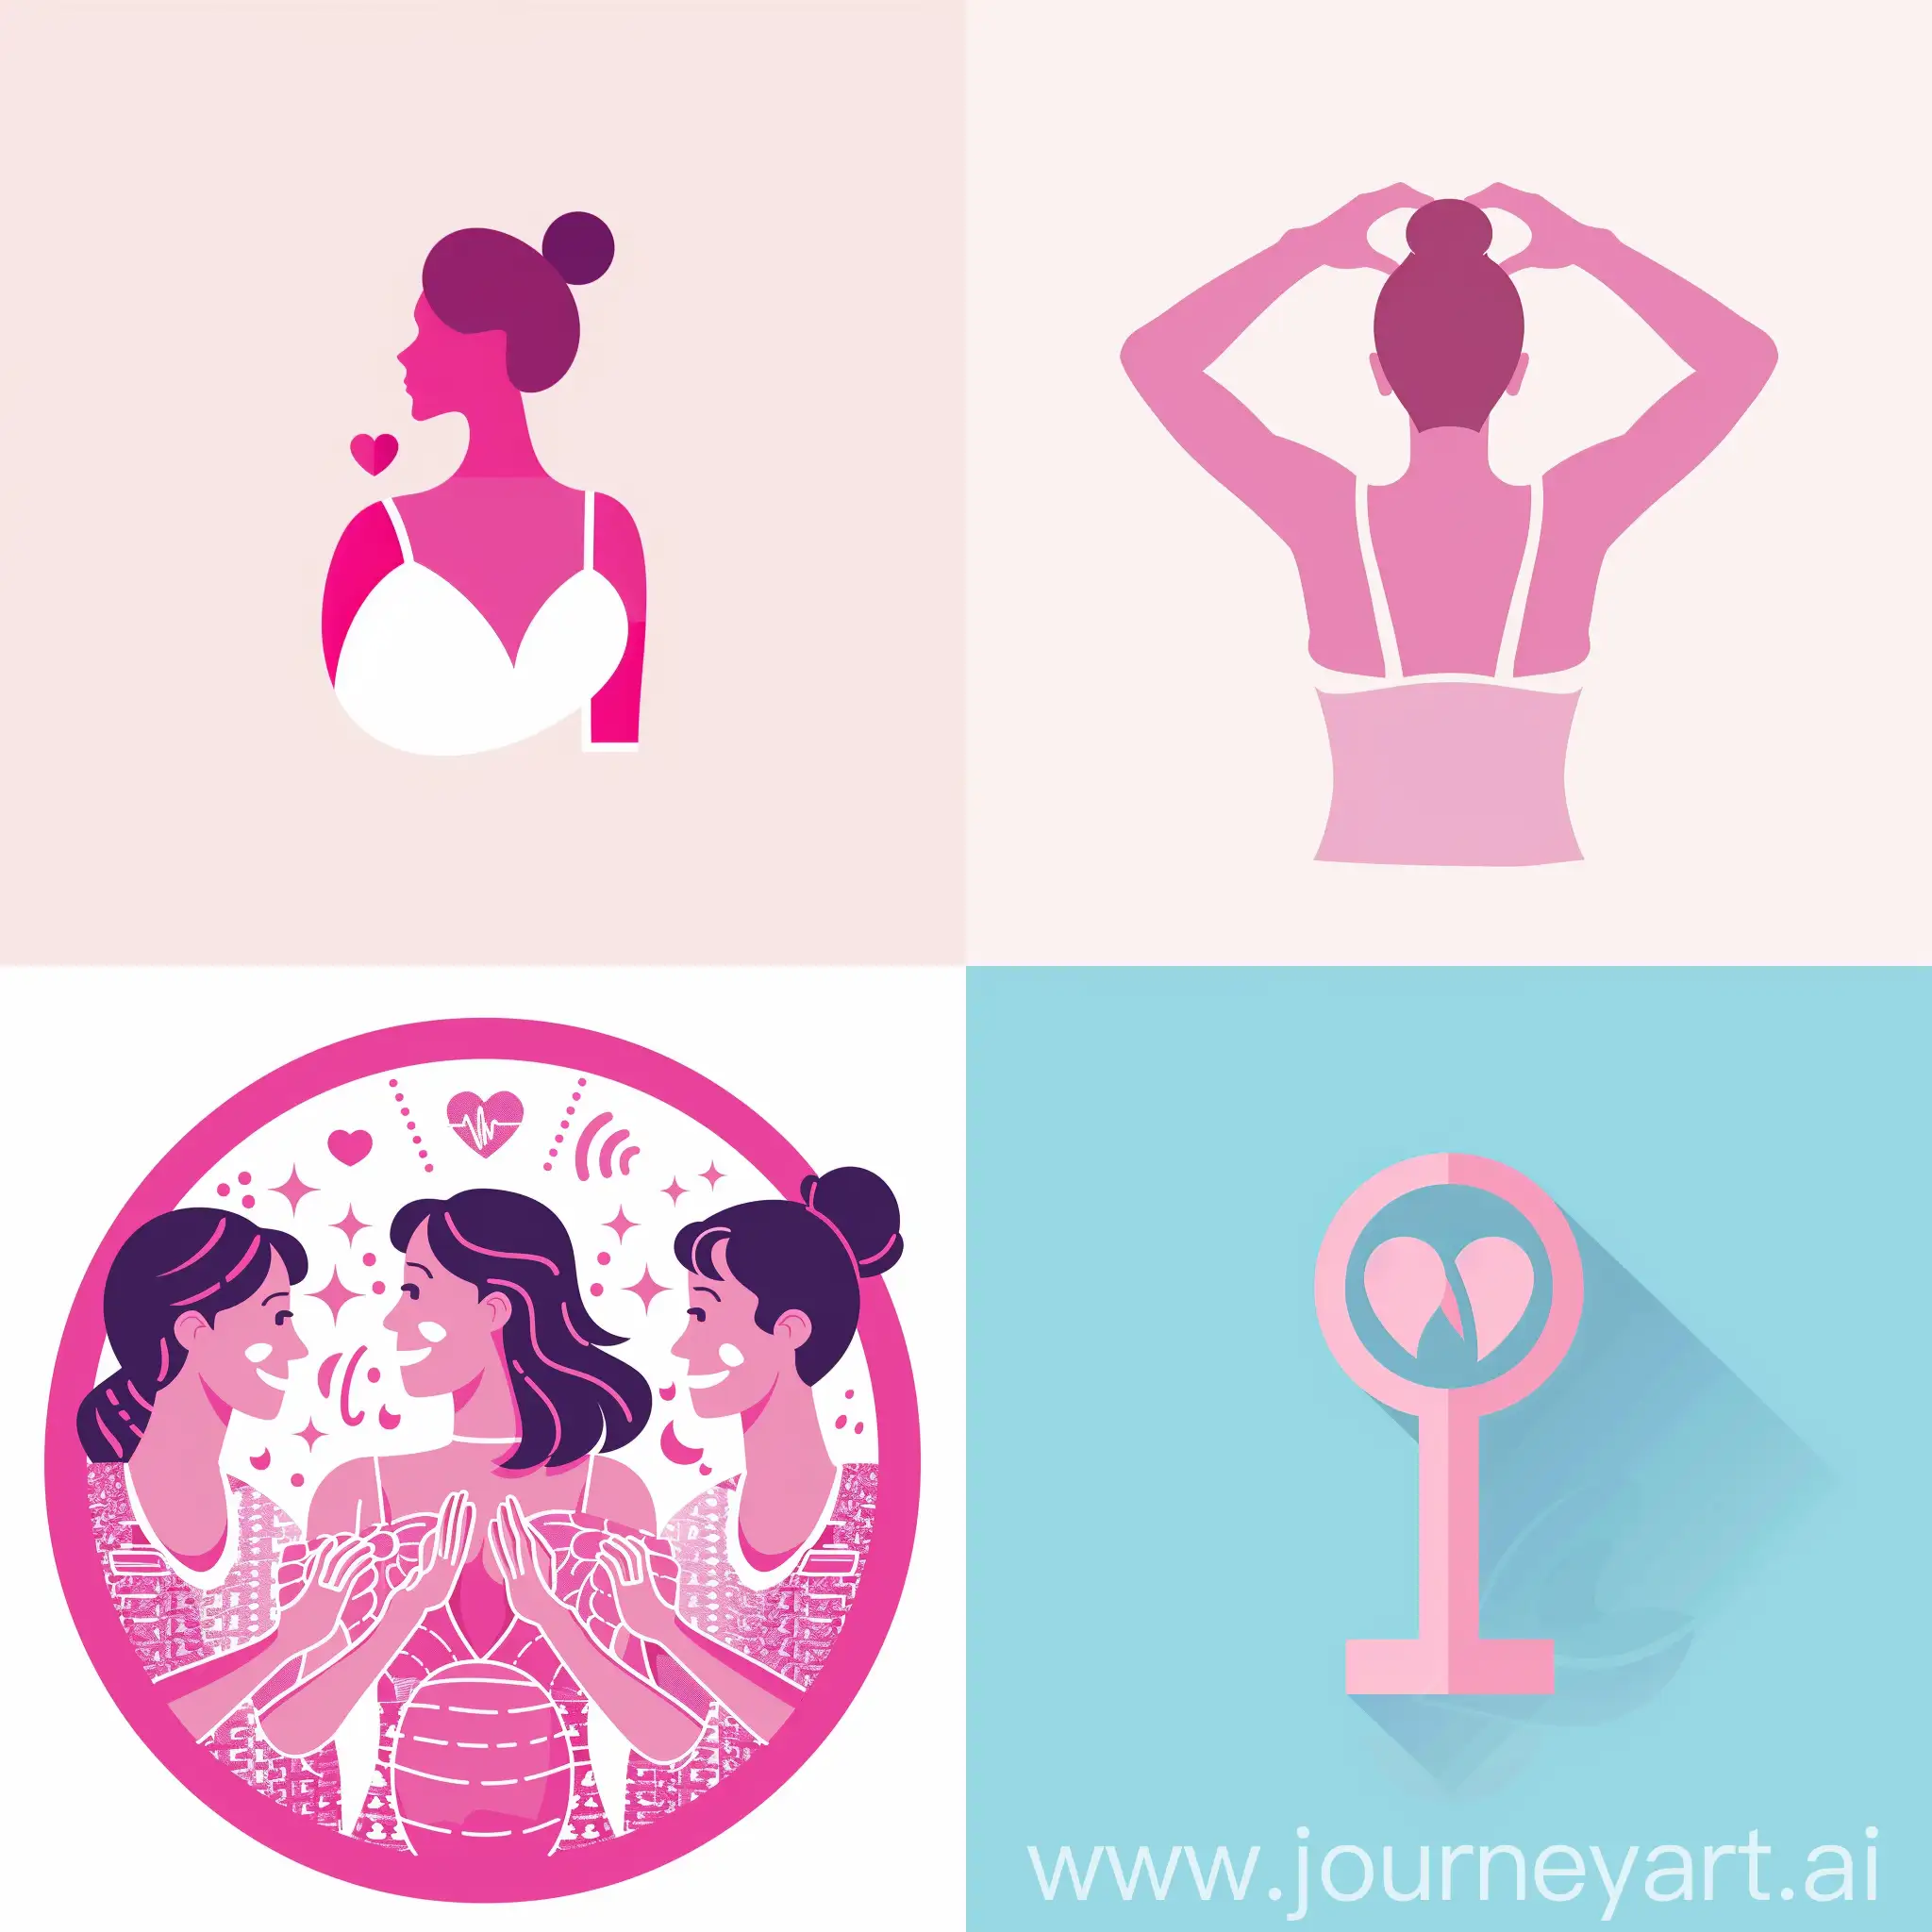 vector pictograms, breast self-examination in women, prevention, image in pink, minimalism